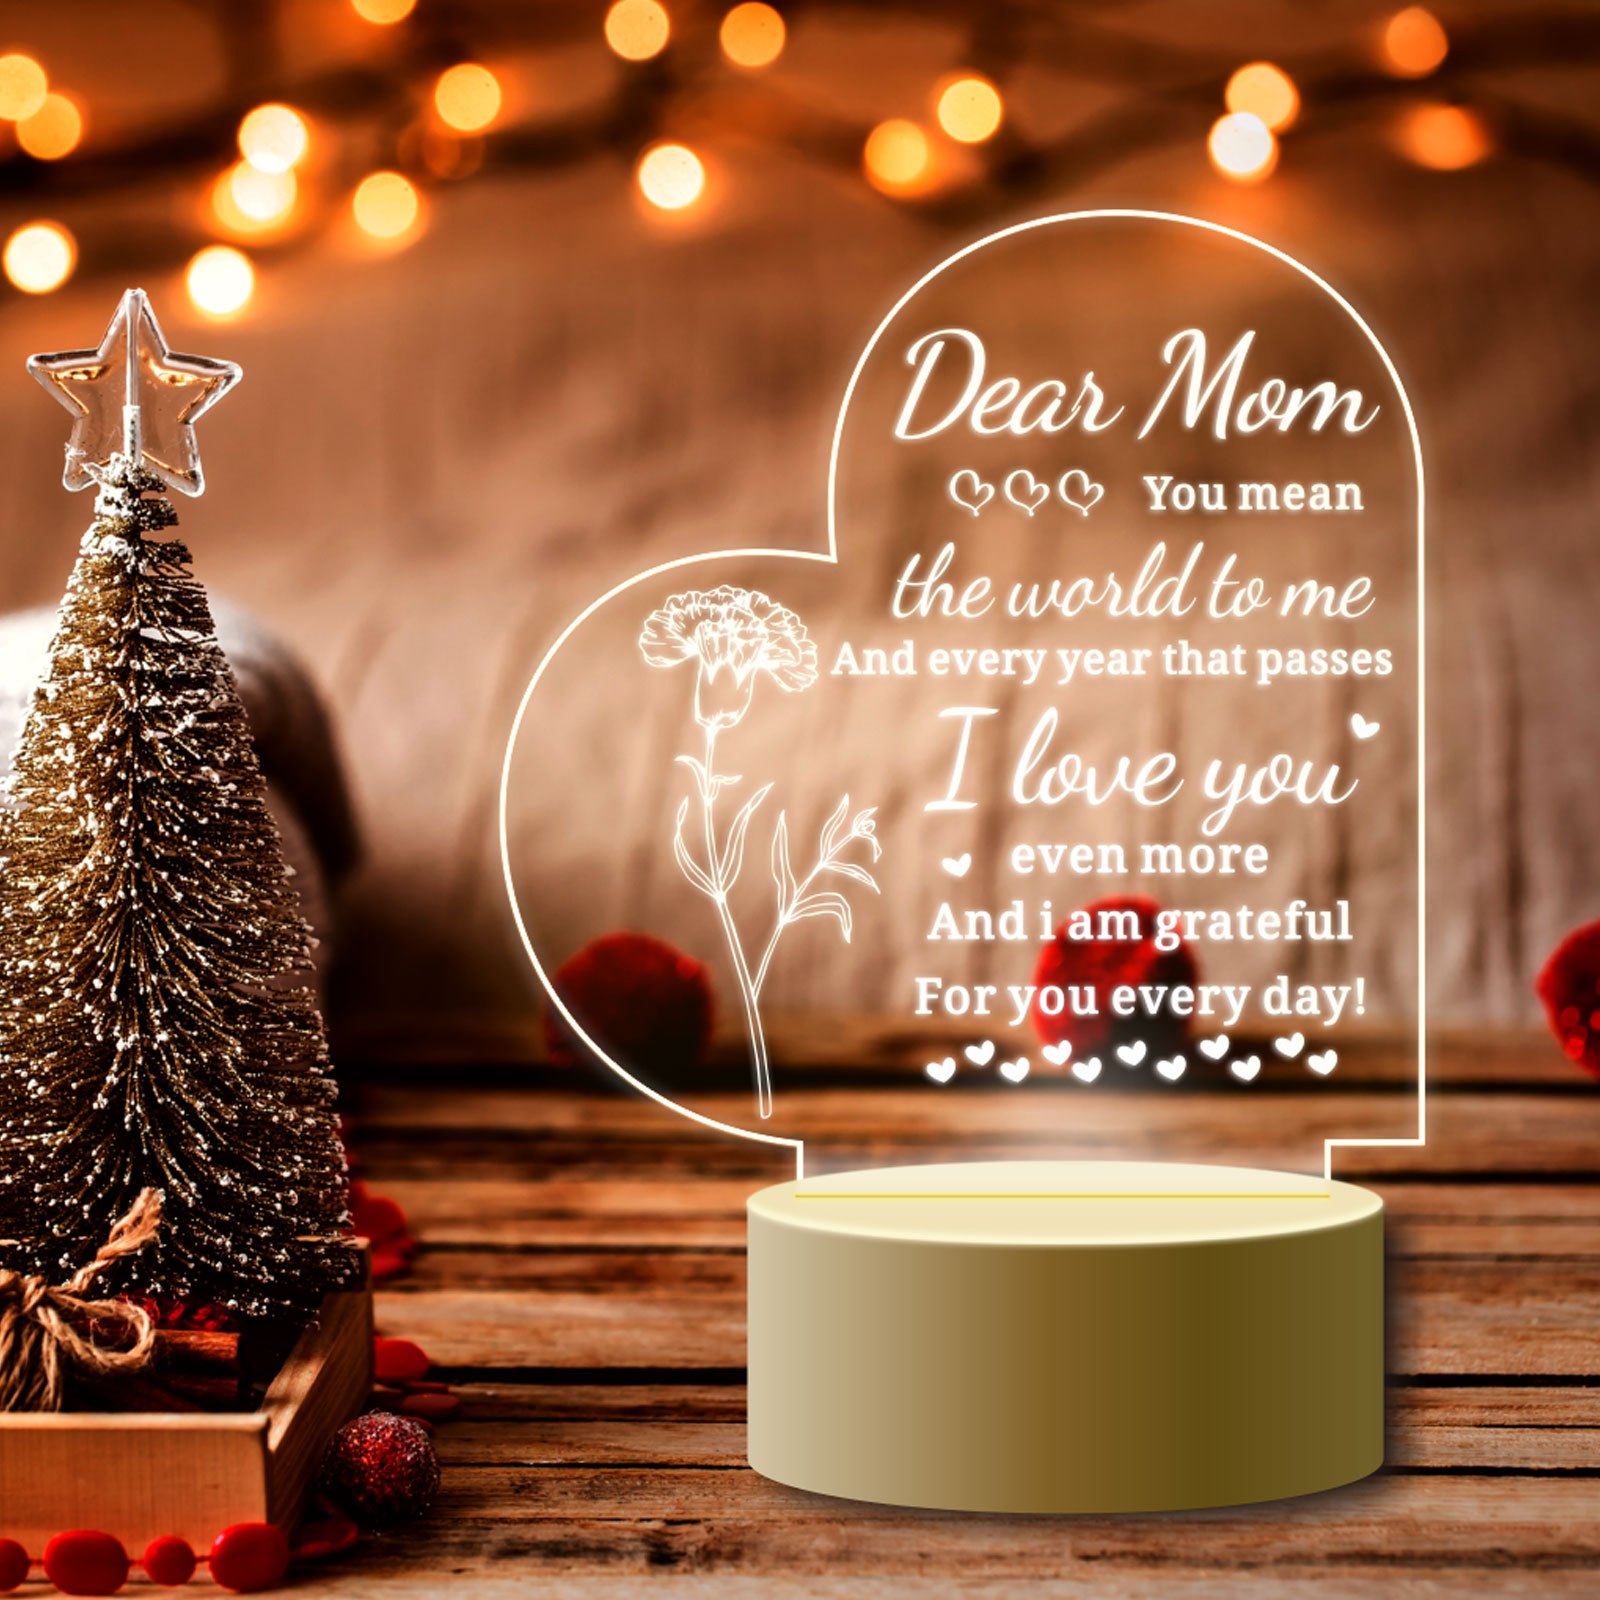 Dear Mom Birthday Gifts For Mom - Mother's Day Gifts - Christmas